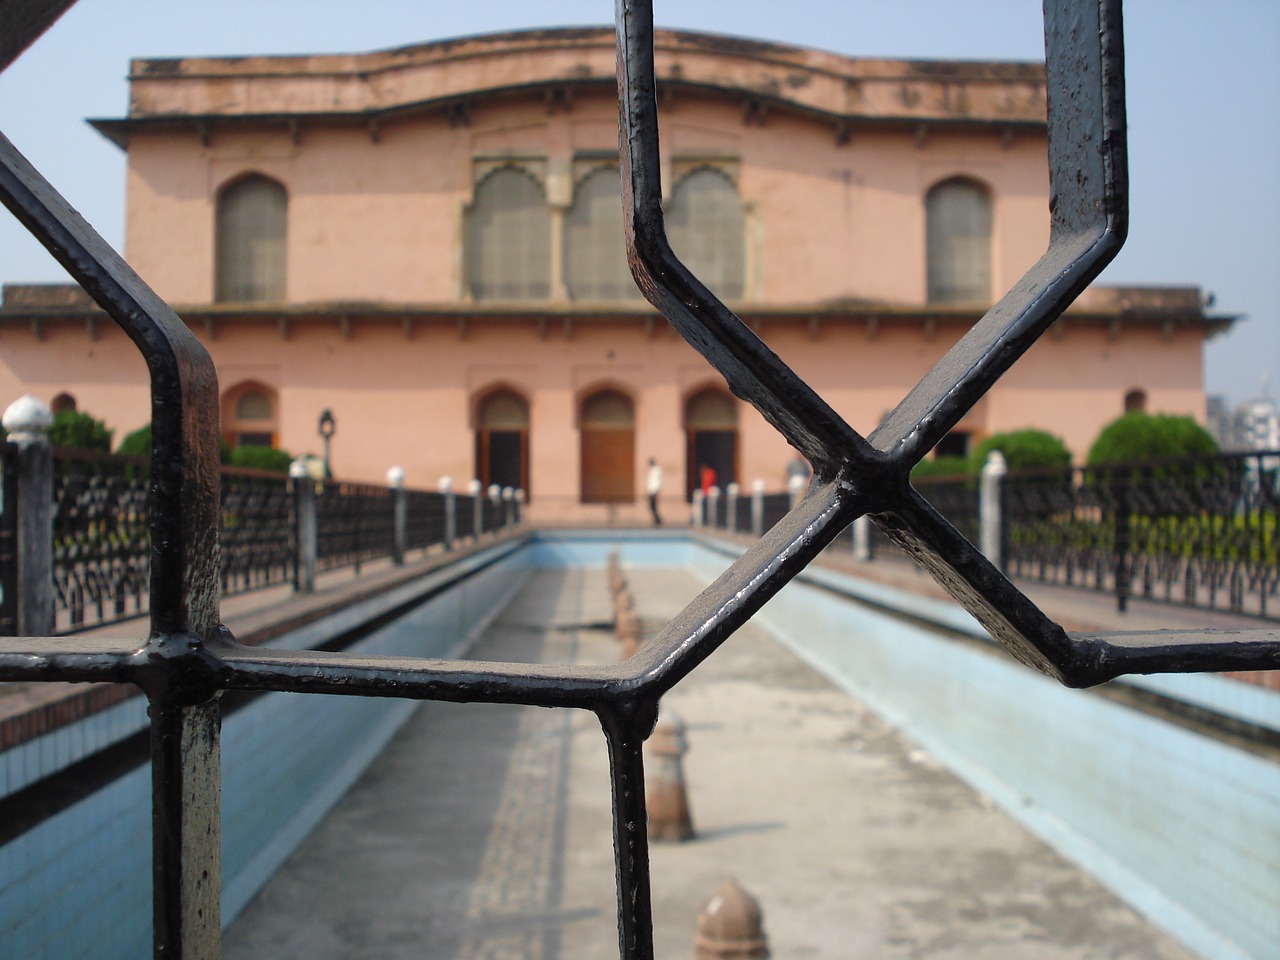 lalbagh fort 17th century mughal fort dhaka free photo